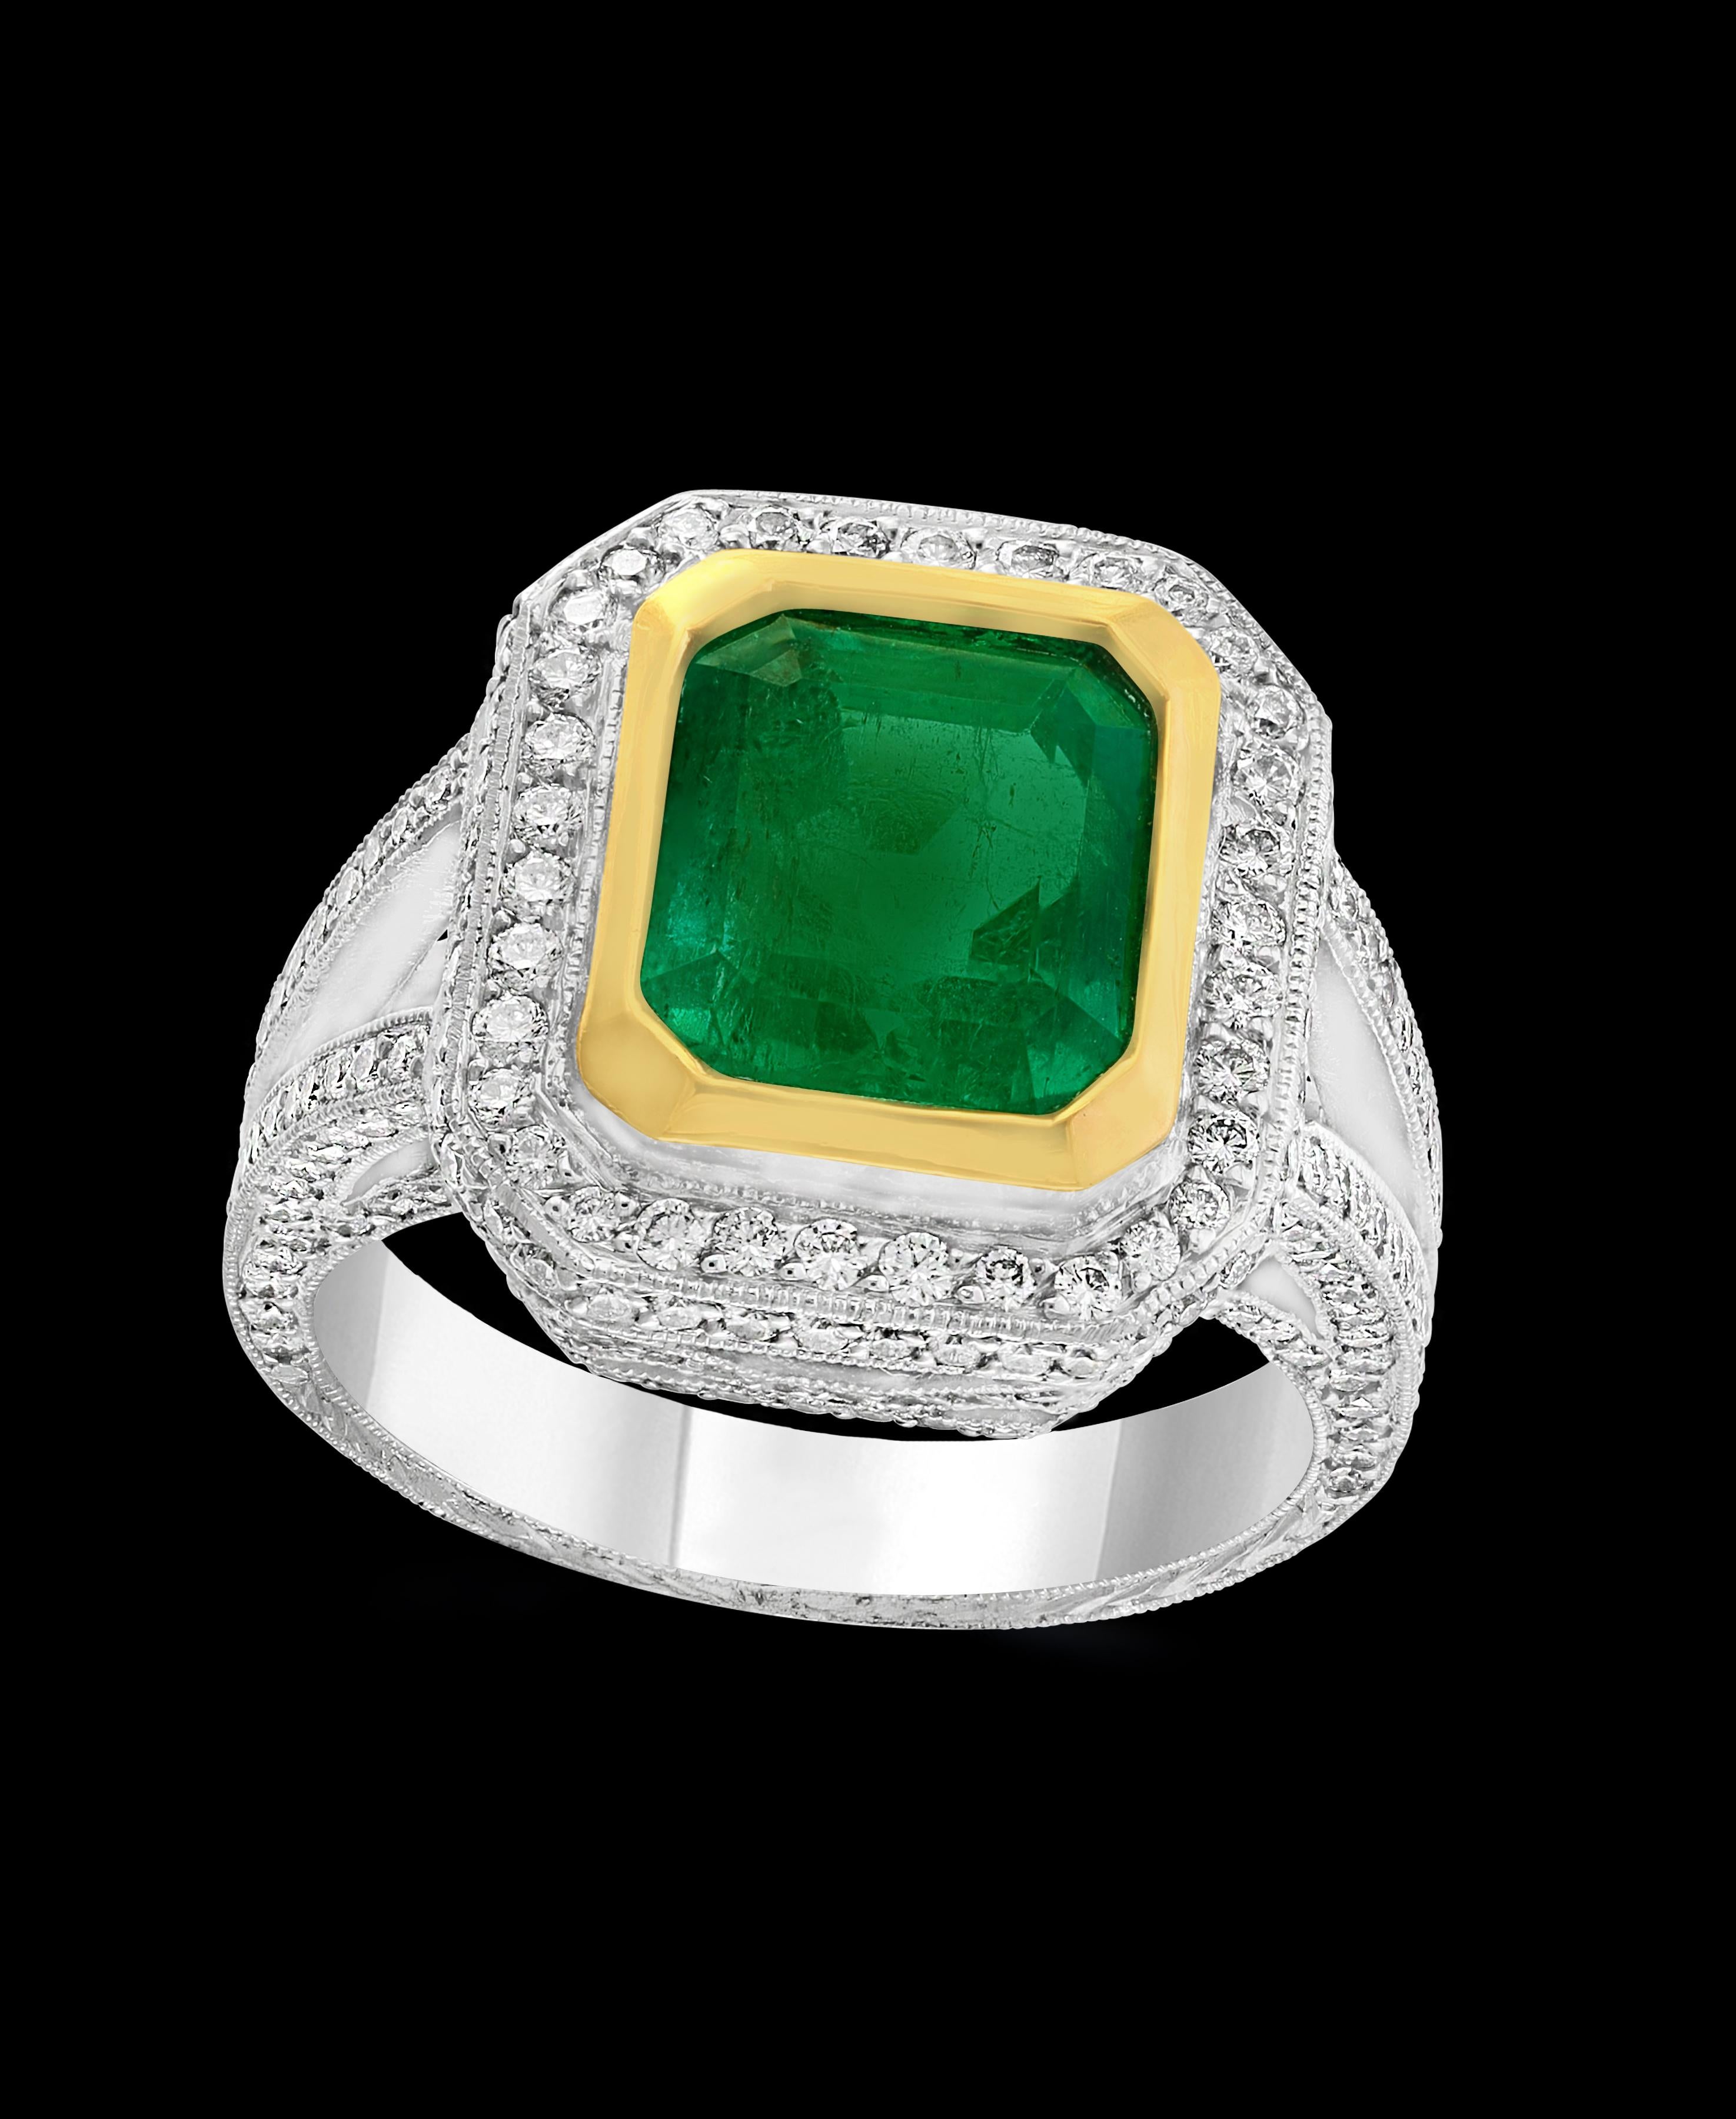 A classic, Cocktail ring 
3.8 Carat  Colombian Emerald and Diamond Ring, Estate.
Platinum 11.4 gm
 Diamonds: approximate 1.5 Carat 
Emerald: 3.8ct
Origin : Colombia 
Color: Deep  Green, Transparent extreme Fine Color Quality
One of our finest